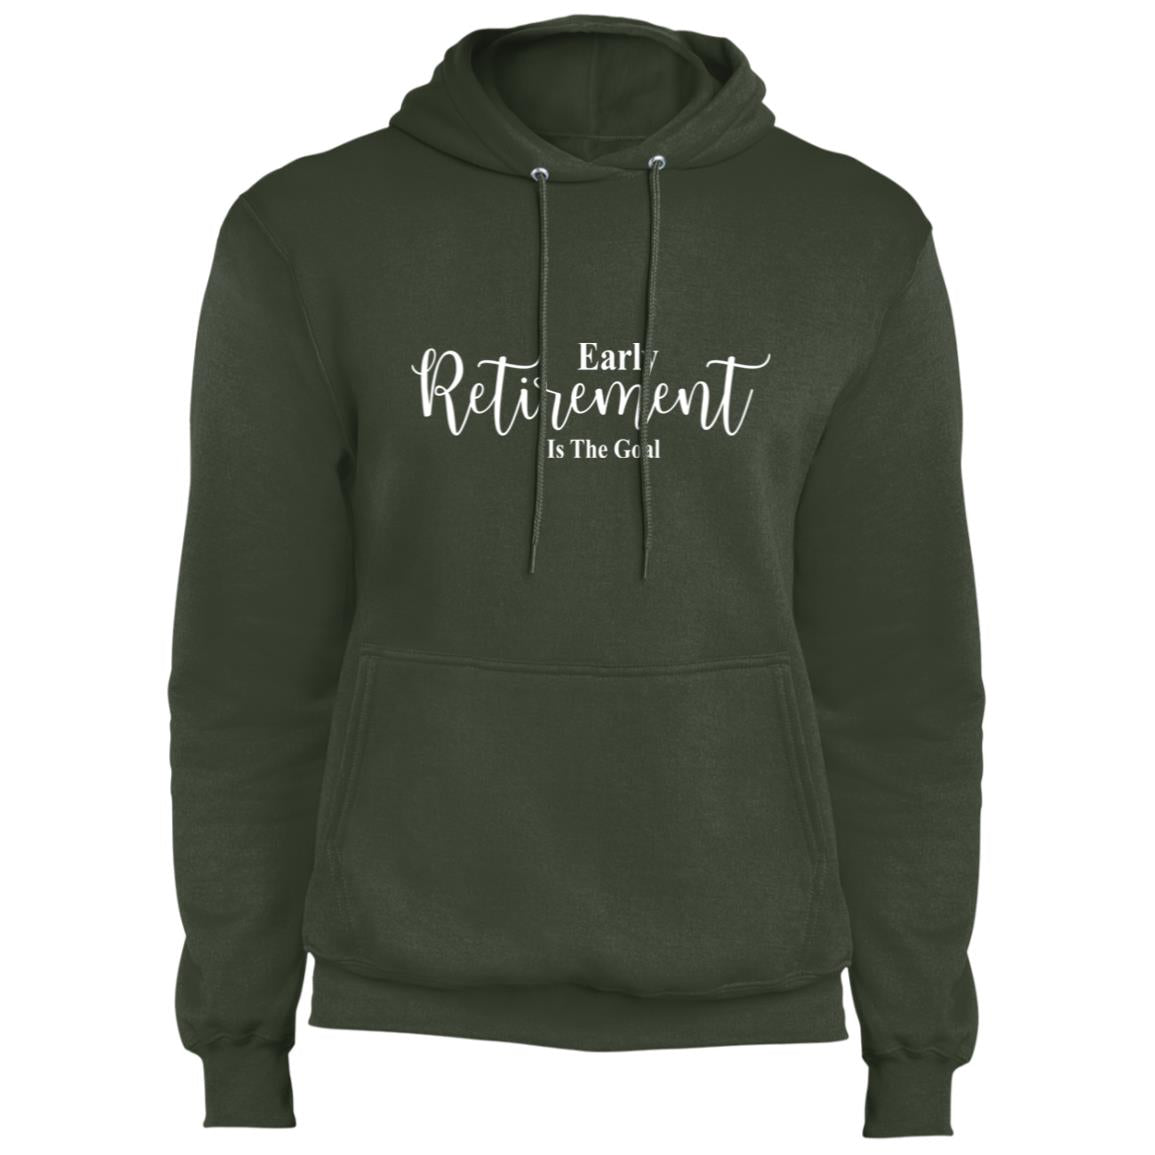 Early Retirement Is The Goal - Fleece Pullover Hoodie